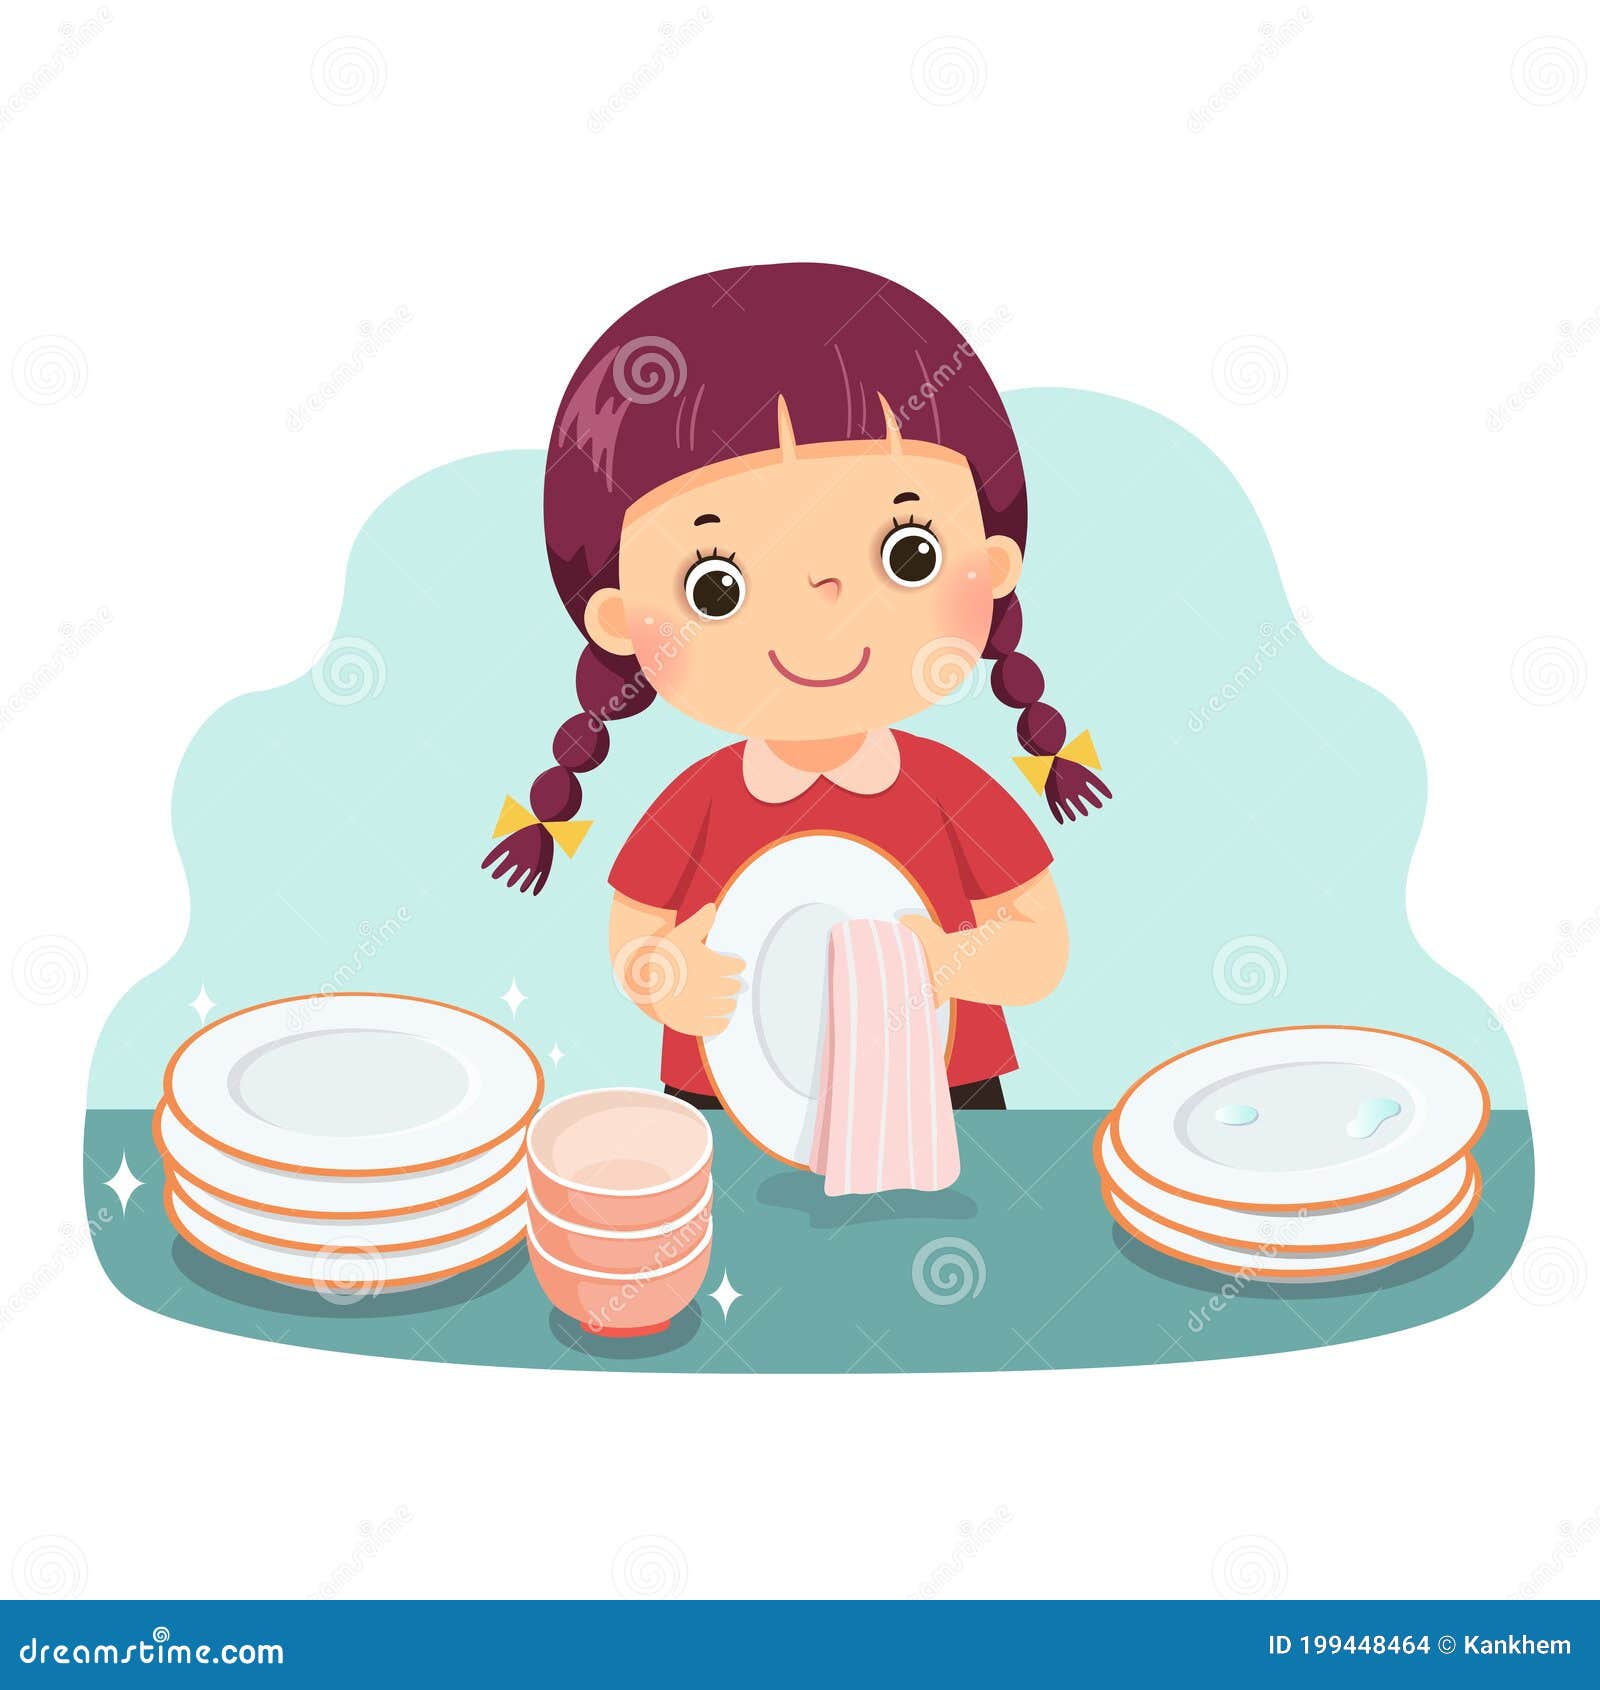 cartoon of a little girl drying the dishes at kitchen counter. kids doing housework chores at home concept